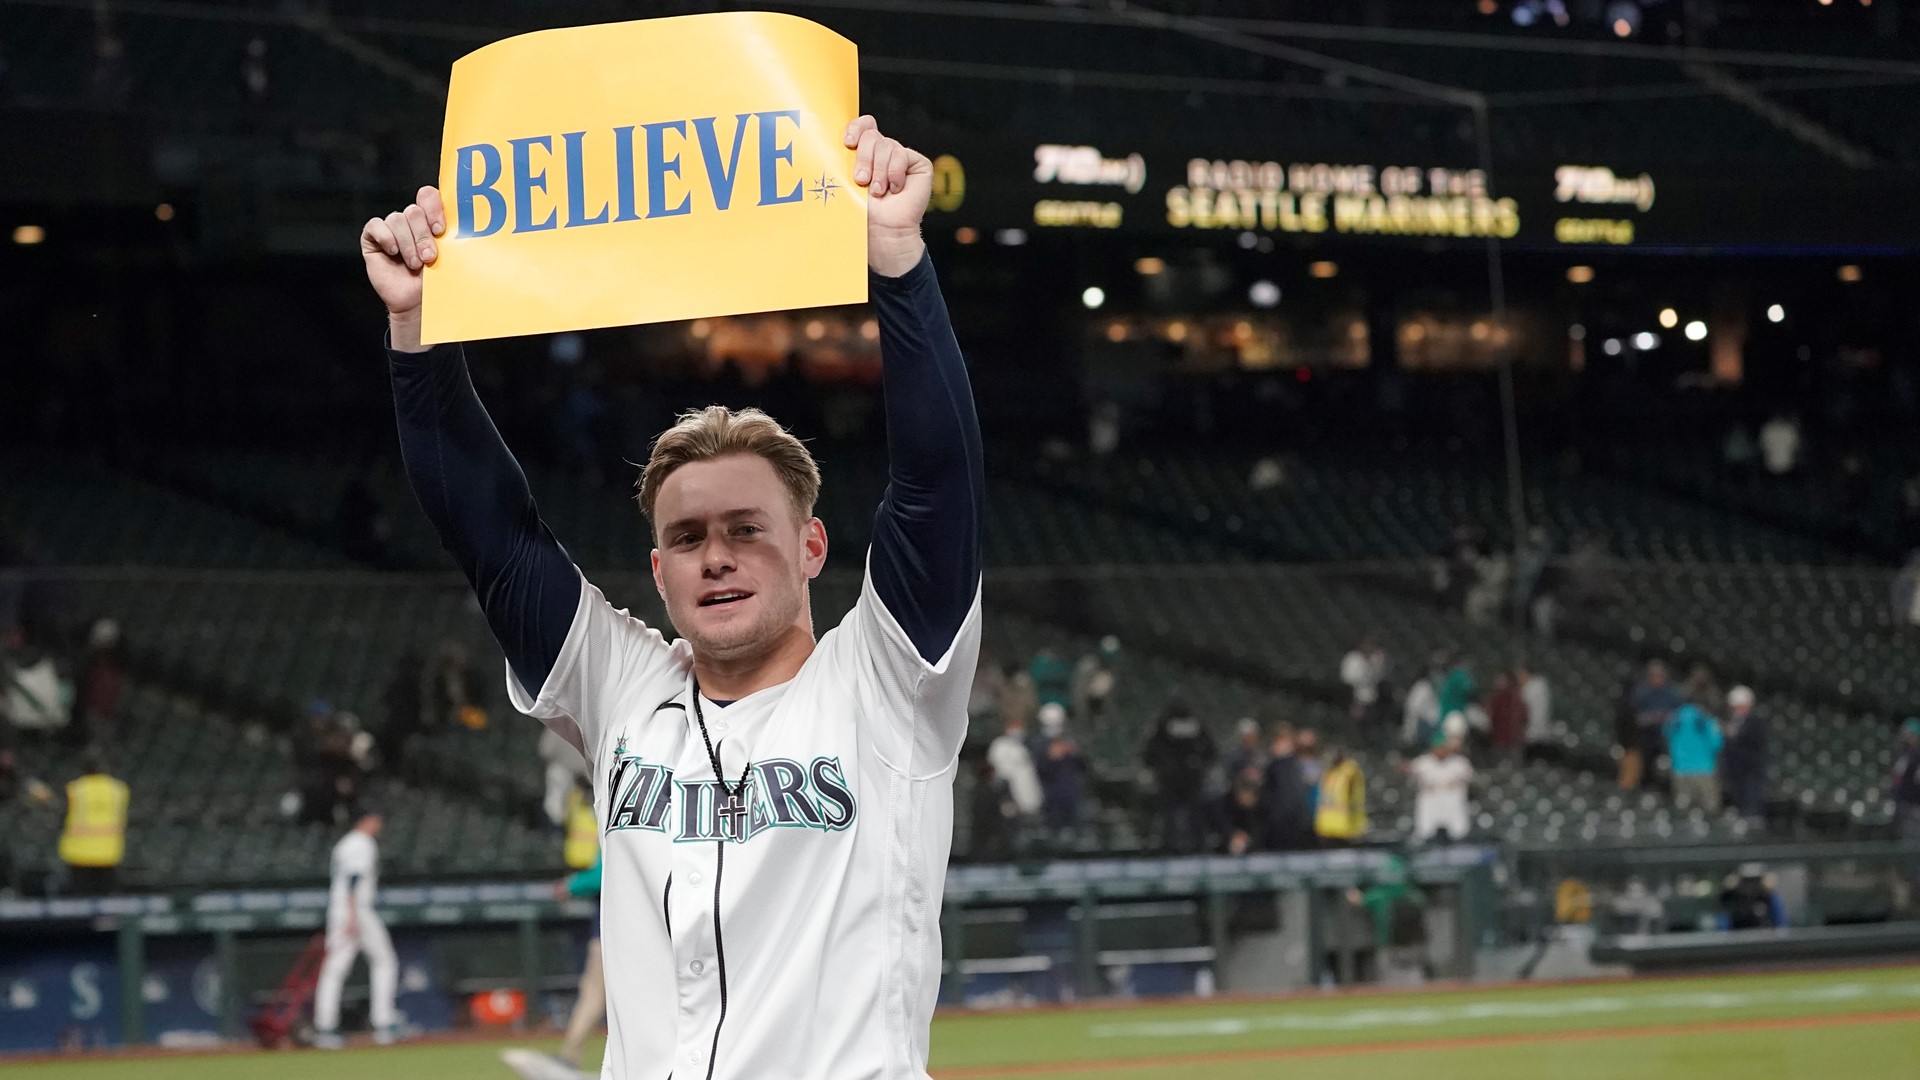 Friday's Mariners game sold out as Seattle competes to make the playoffs